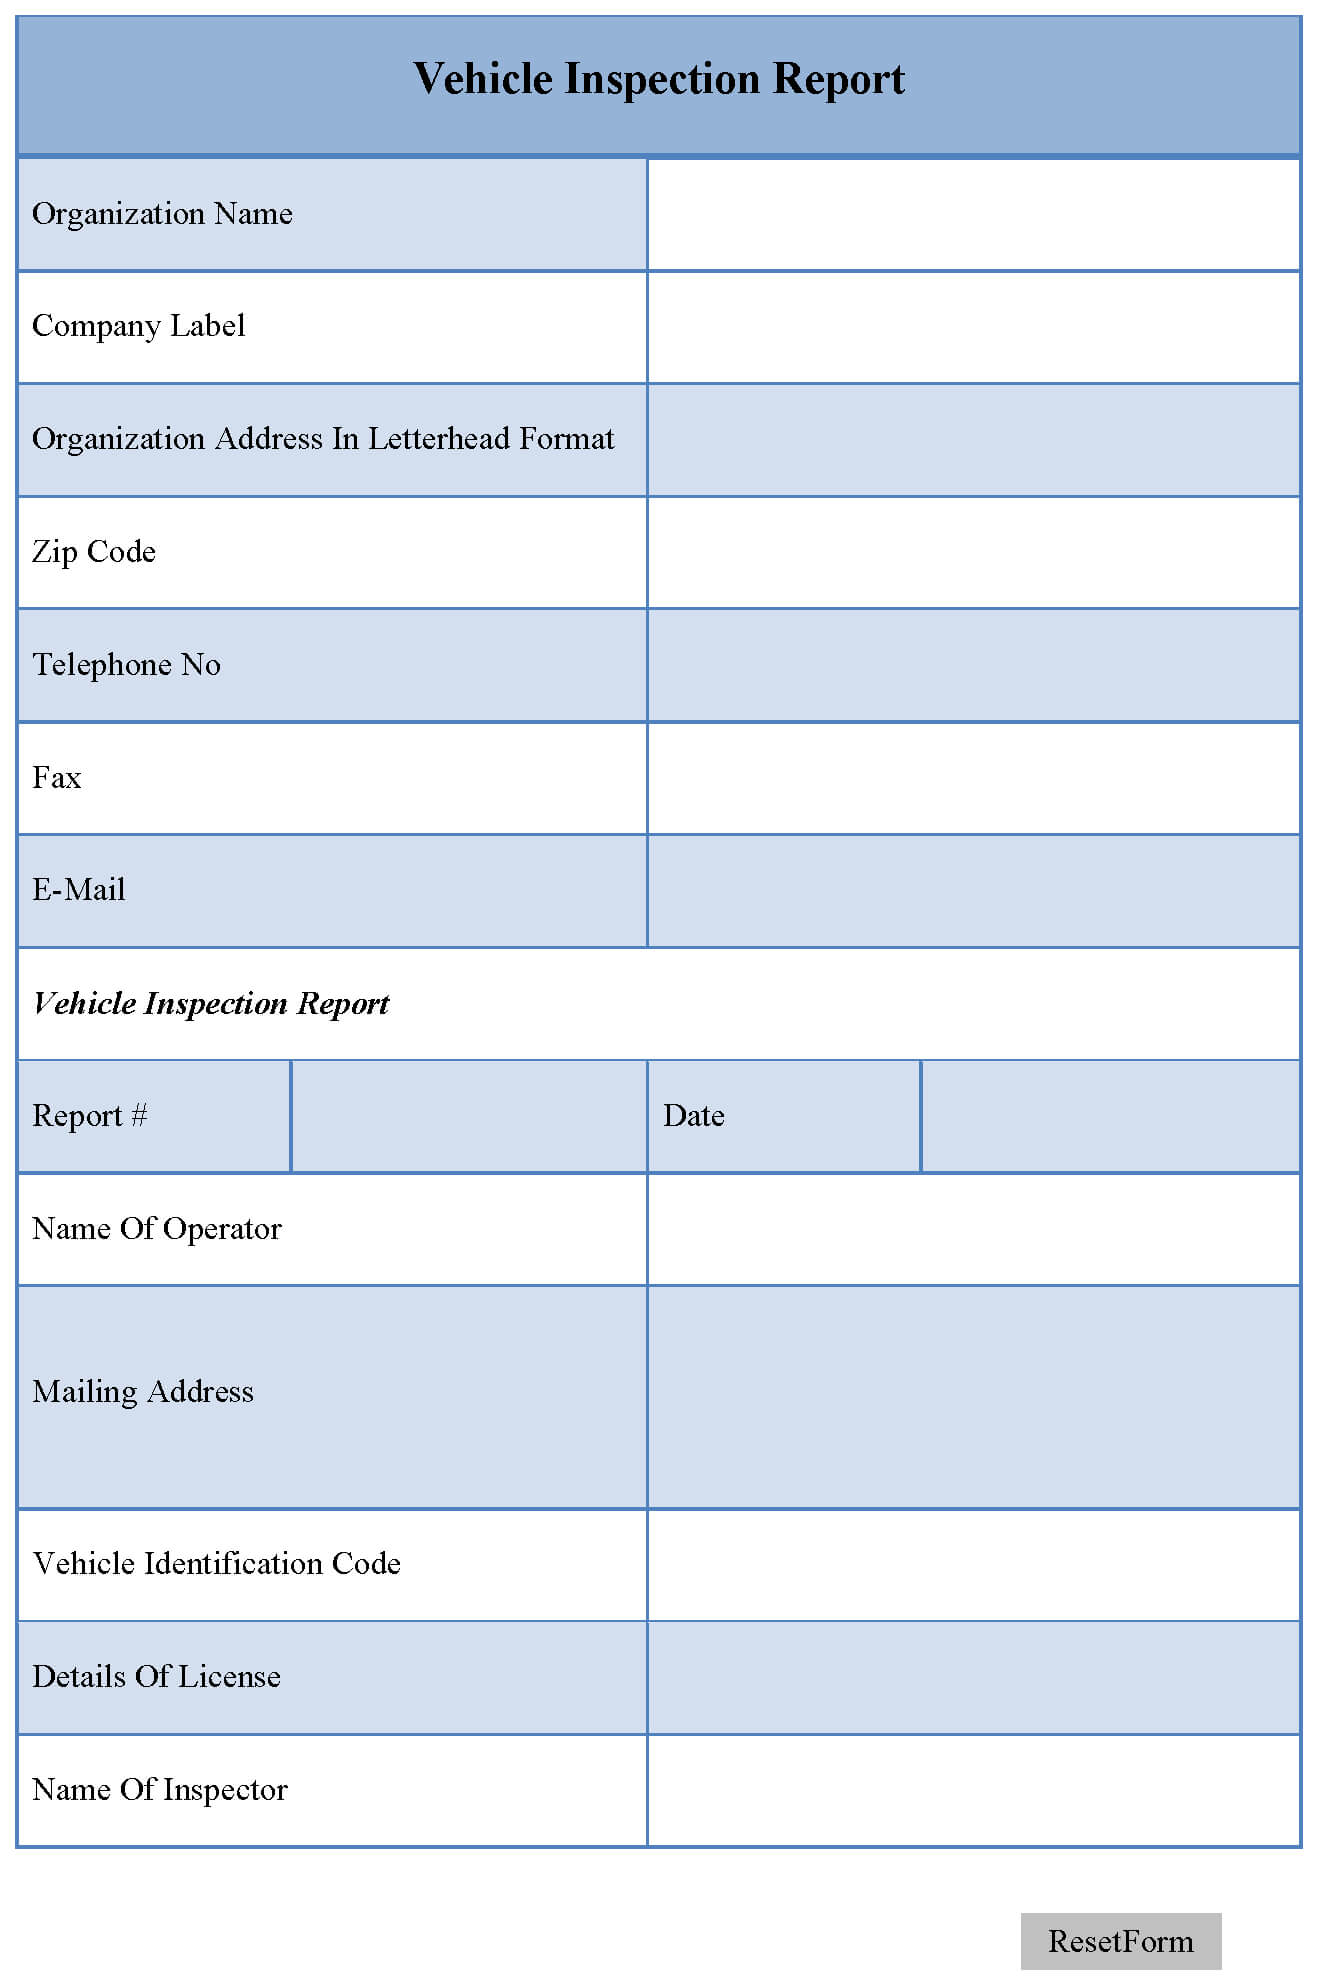 Vehicle Inspection Report Template | Editable Forms Inside Vehicle Inspection Report Template